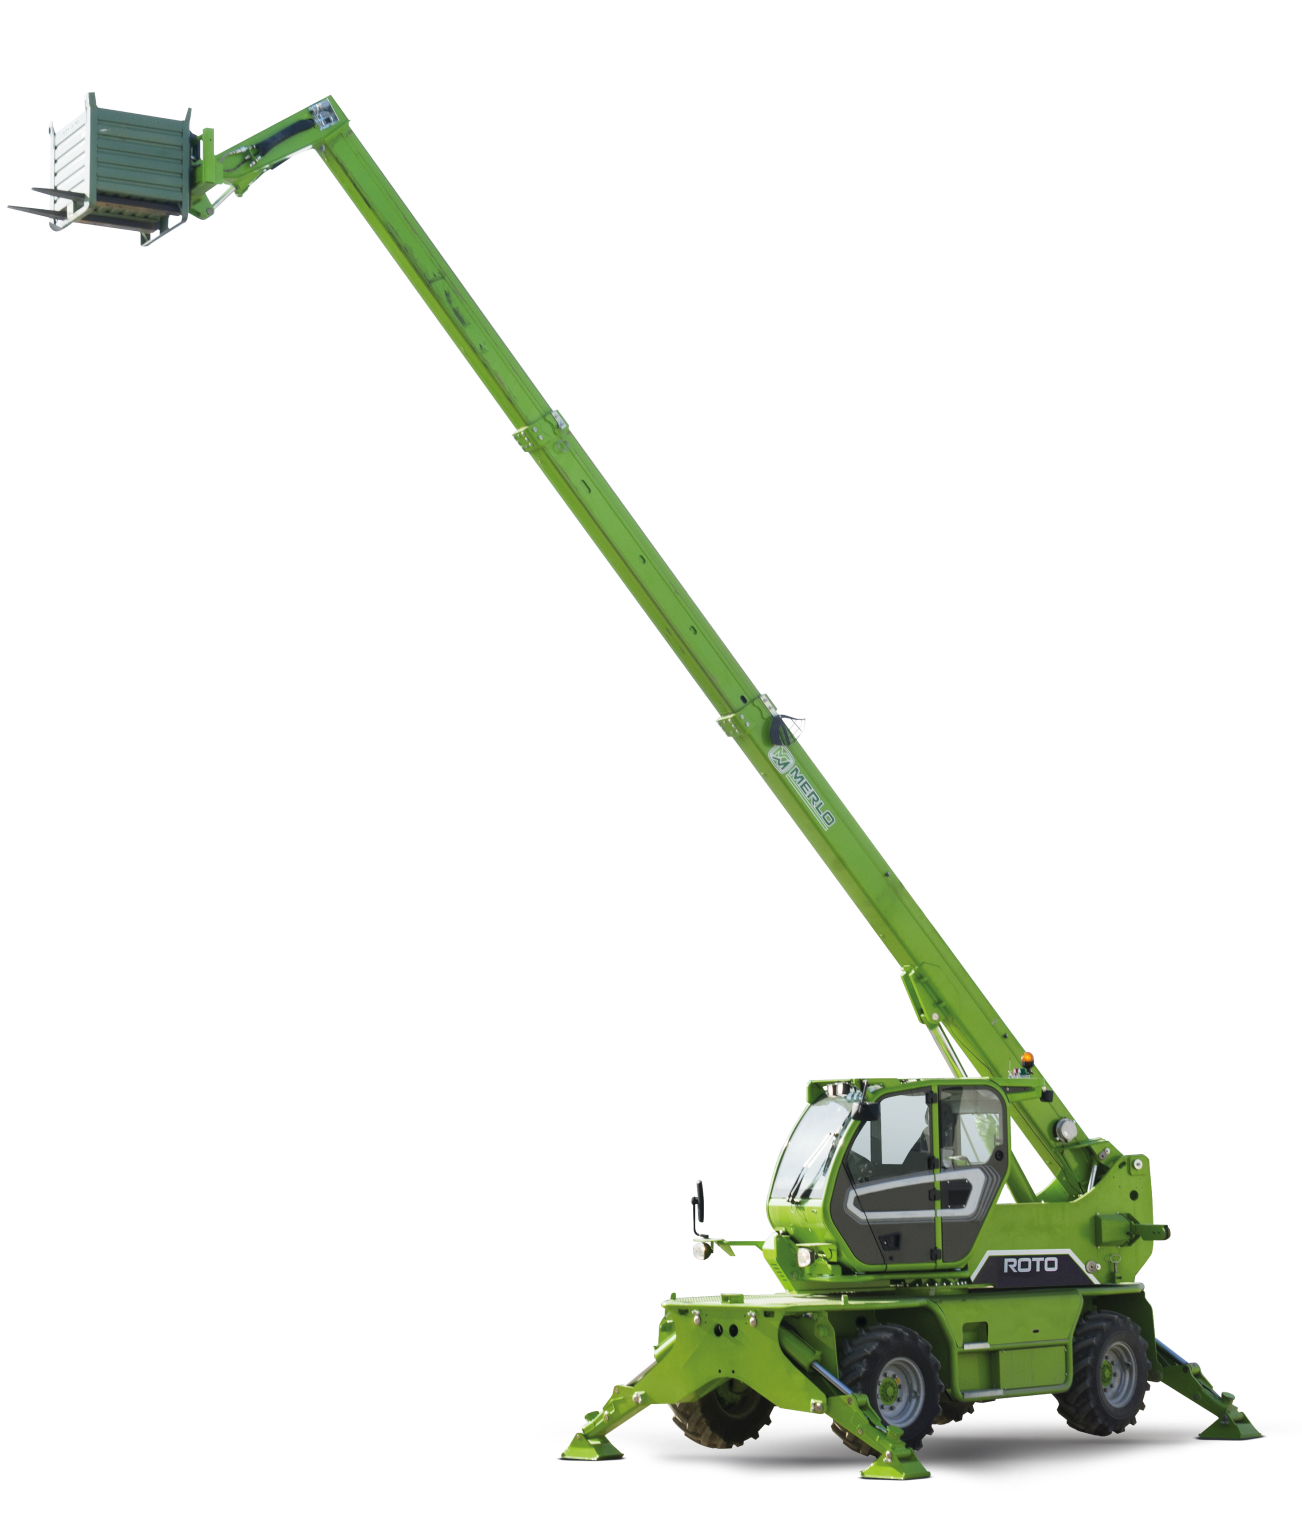 Merlo ROTO40.16 S, the smallest of the rotating telehandlers. Pictured with boom extended and front and back stabilisers.